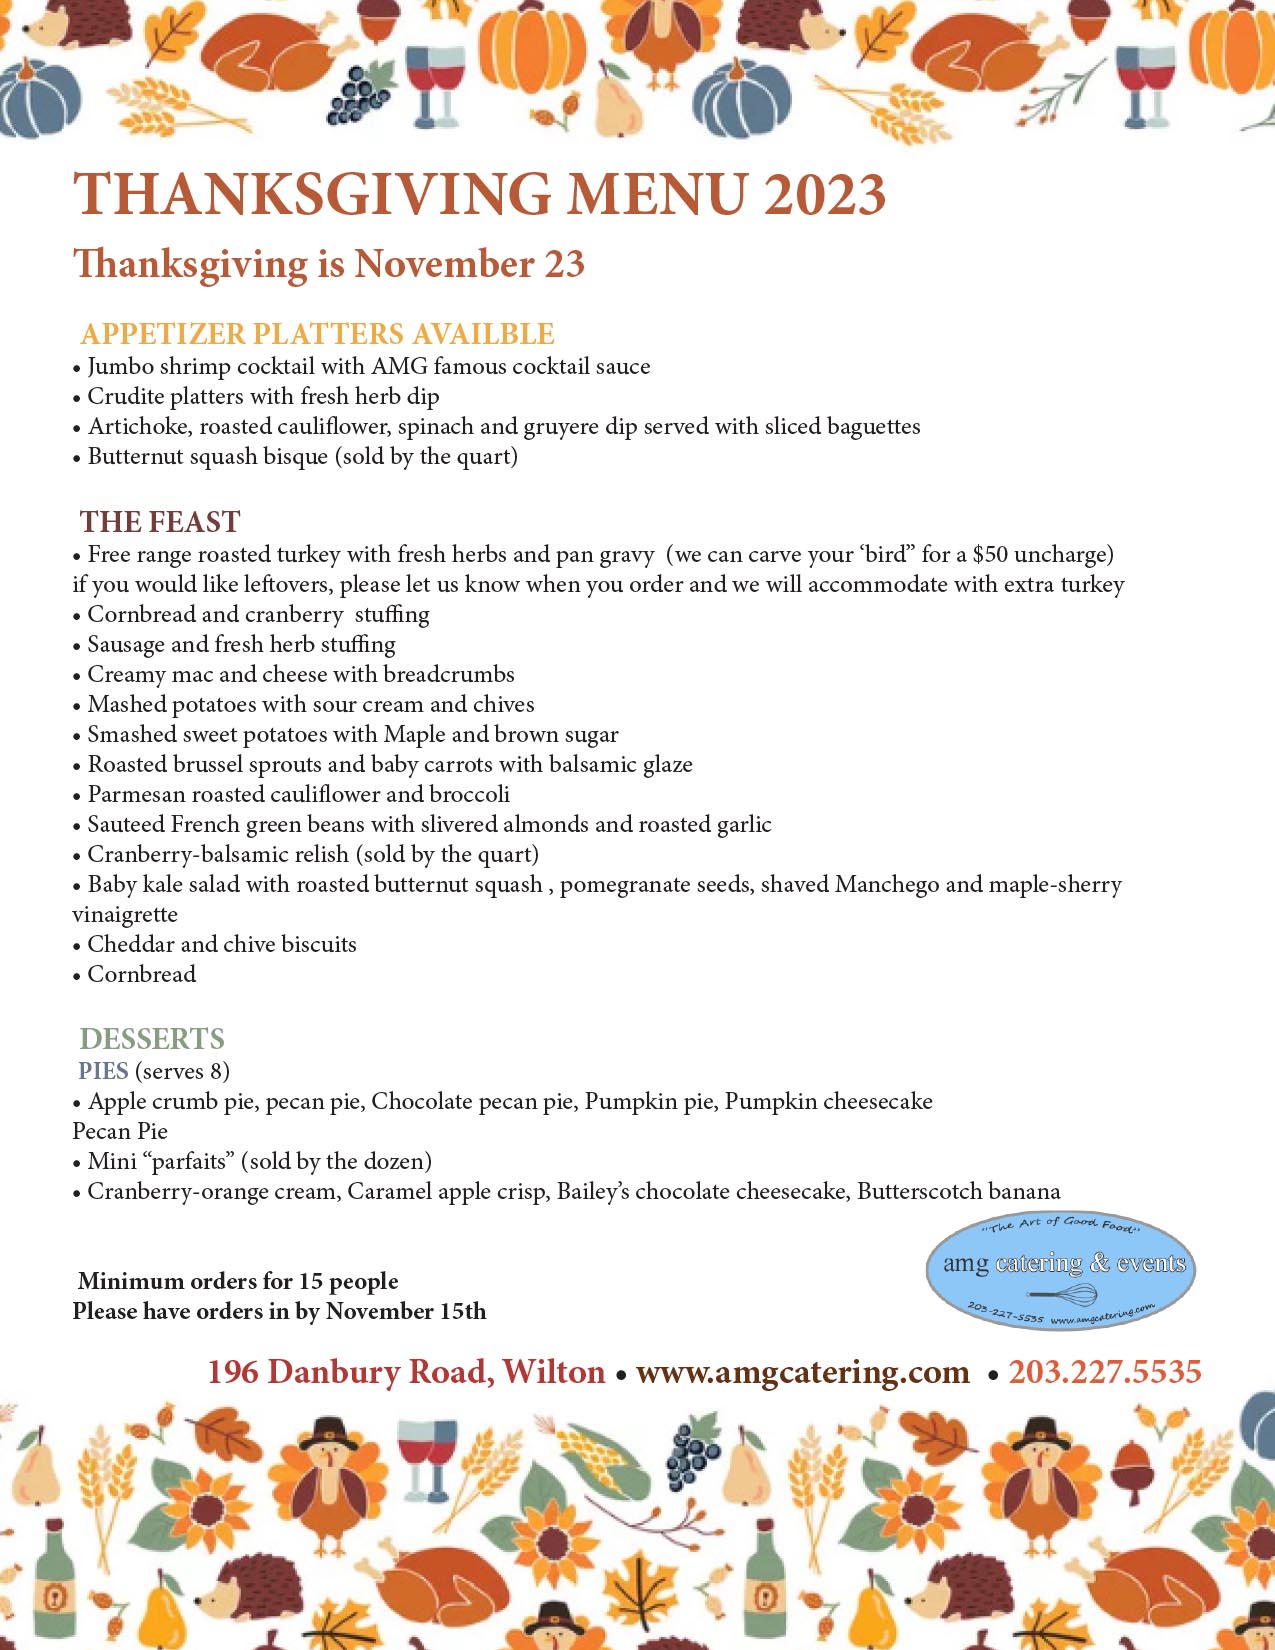 Catered Thanksgiving menu, from AMG Catering & Events